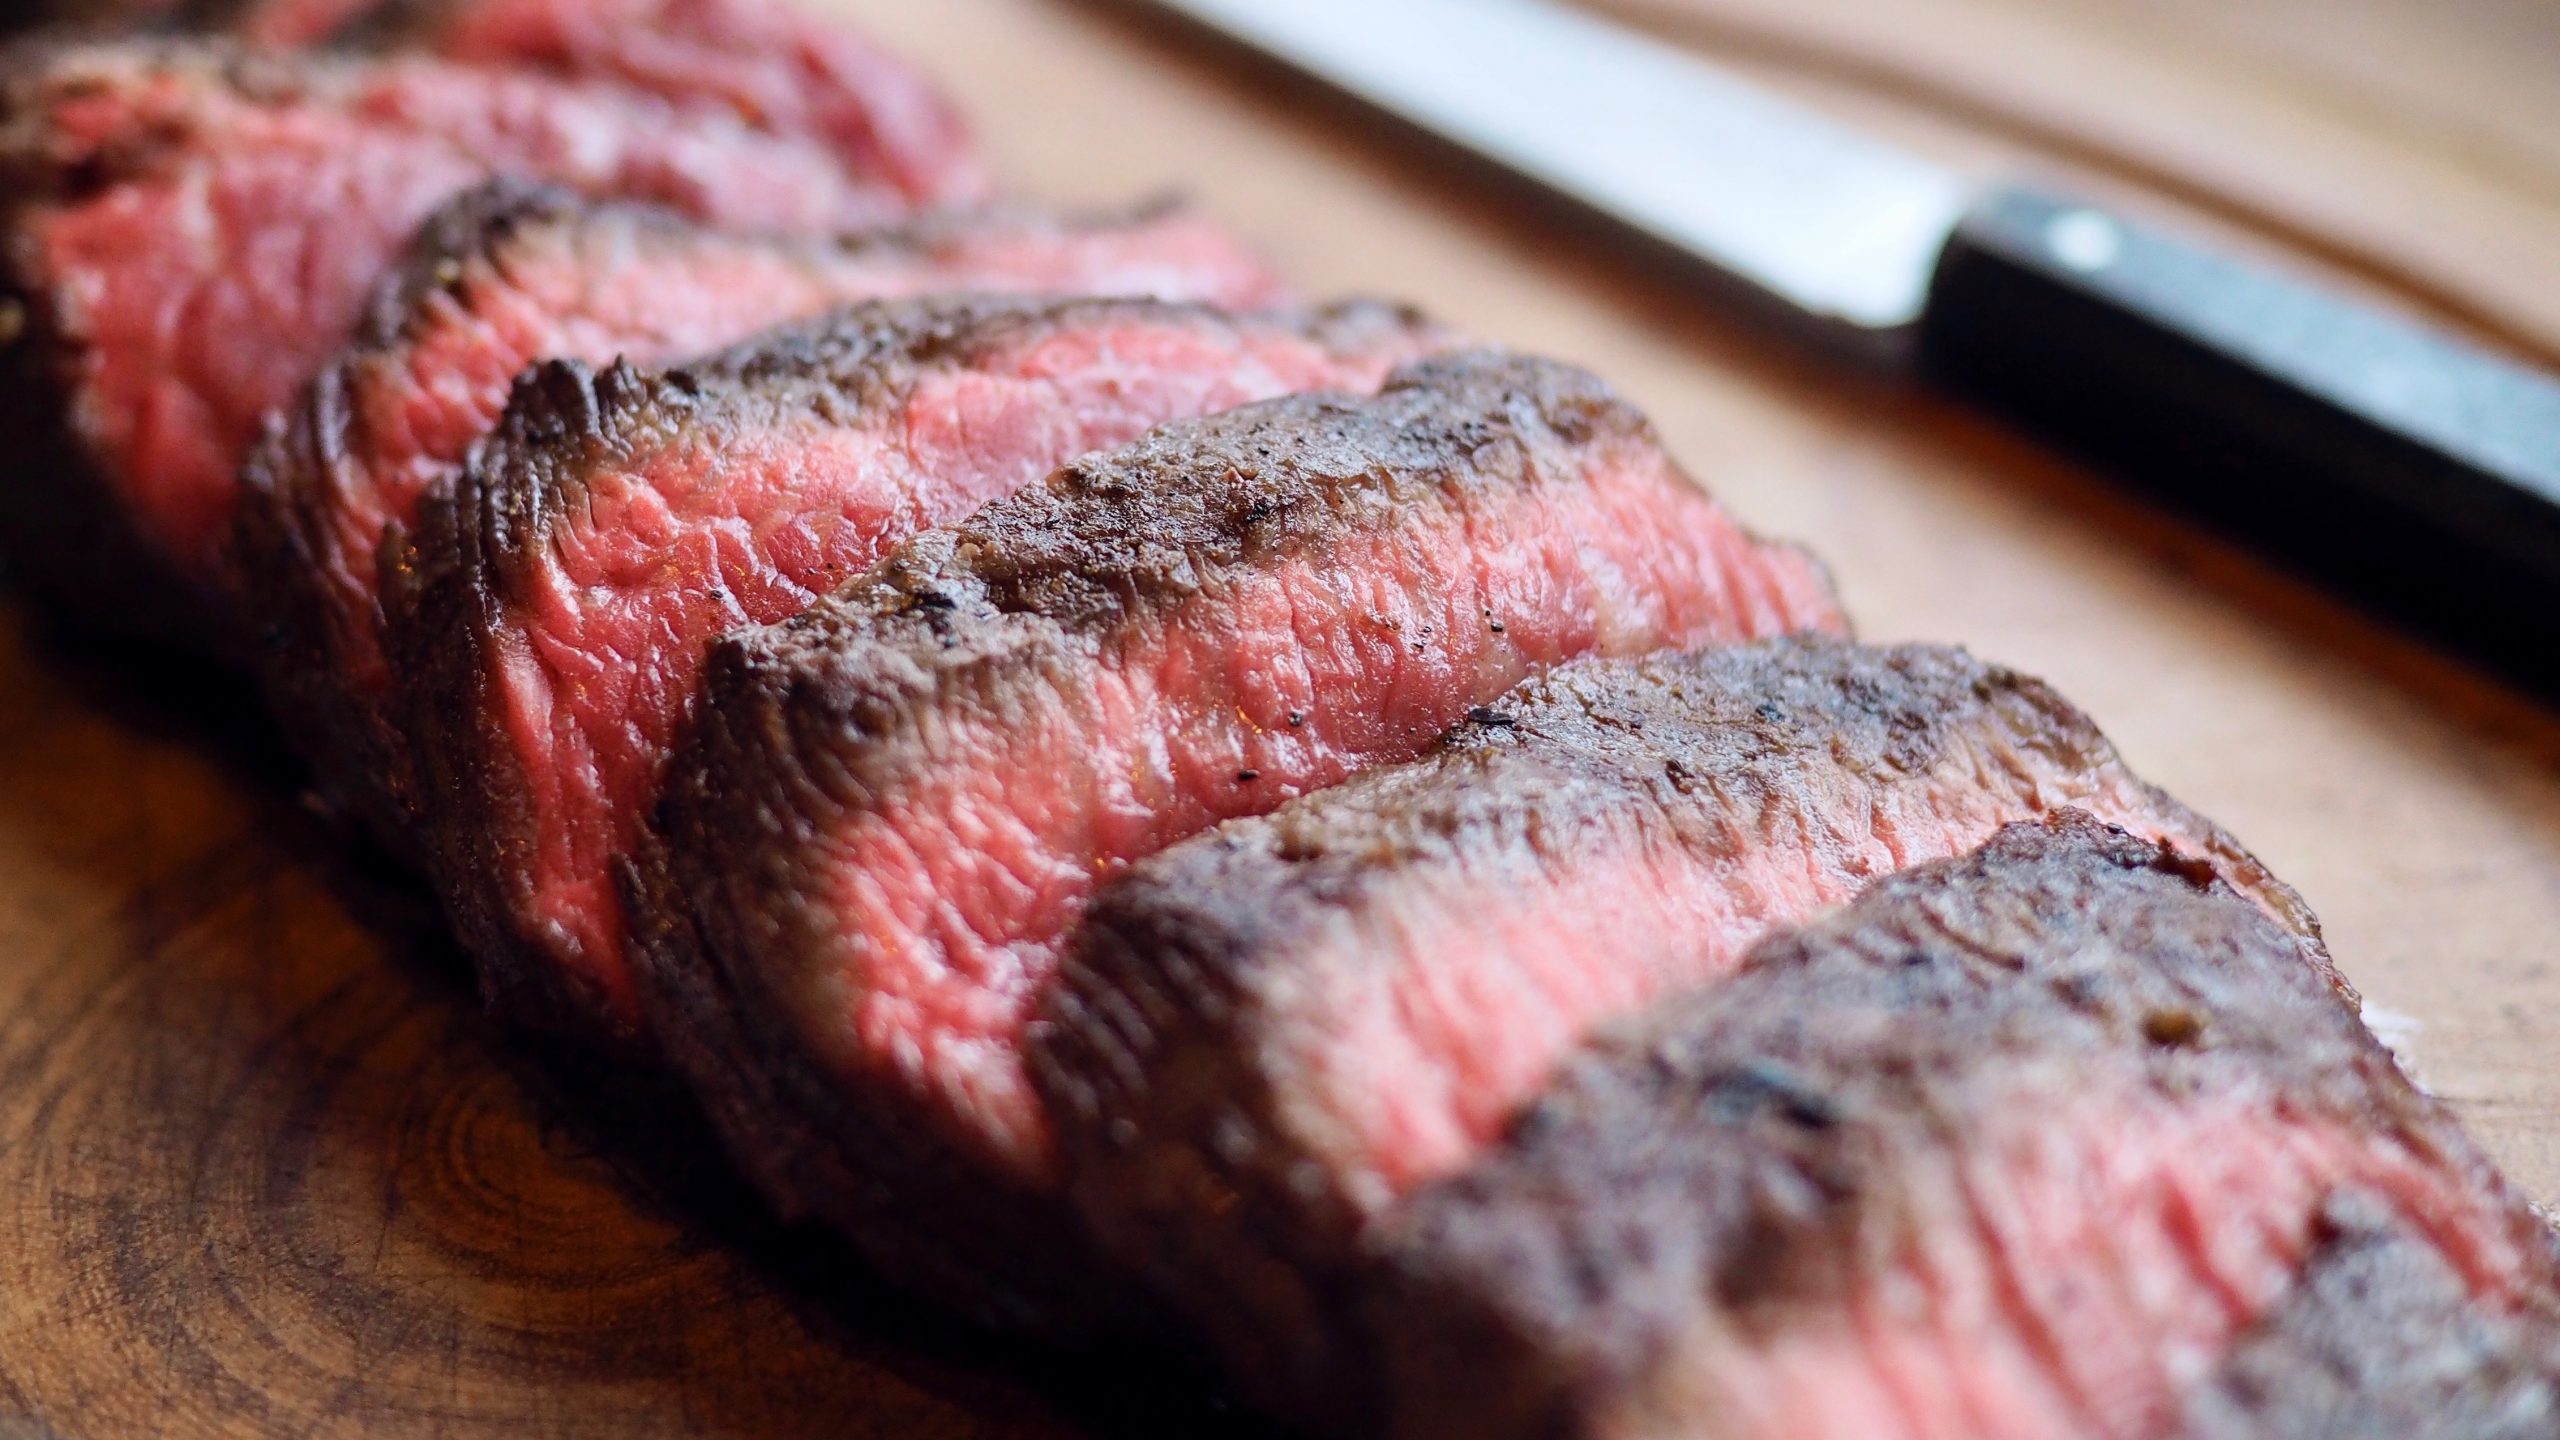 Score These Meats and Vegetables Before Cooking [Video]